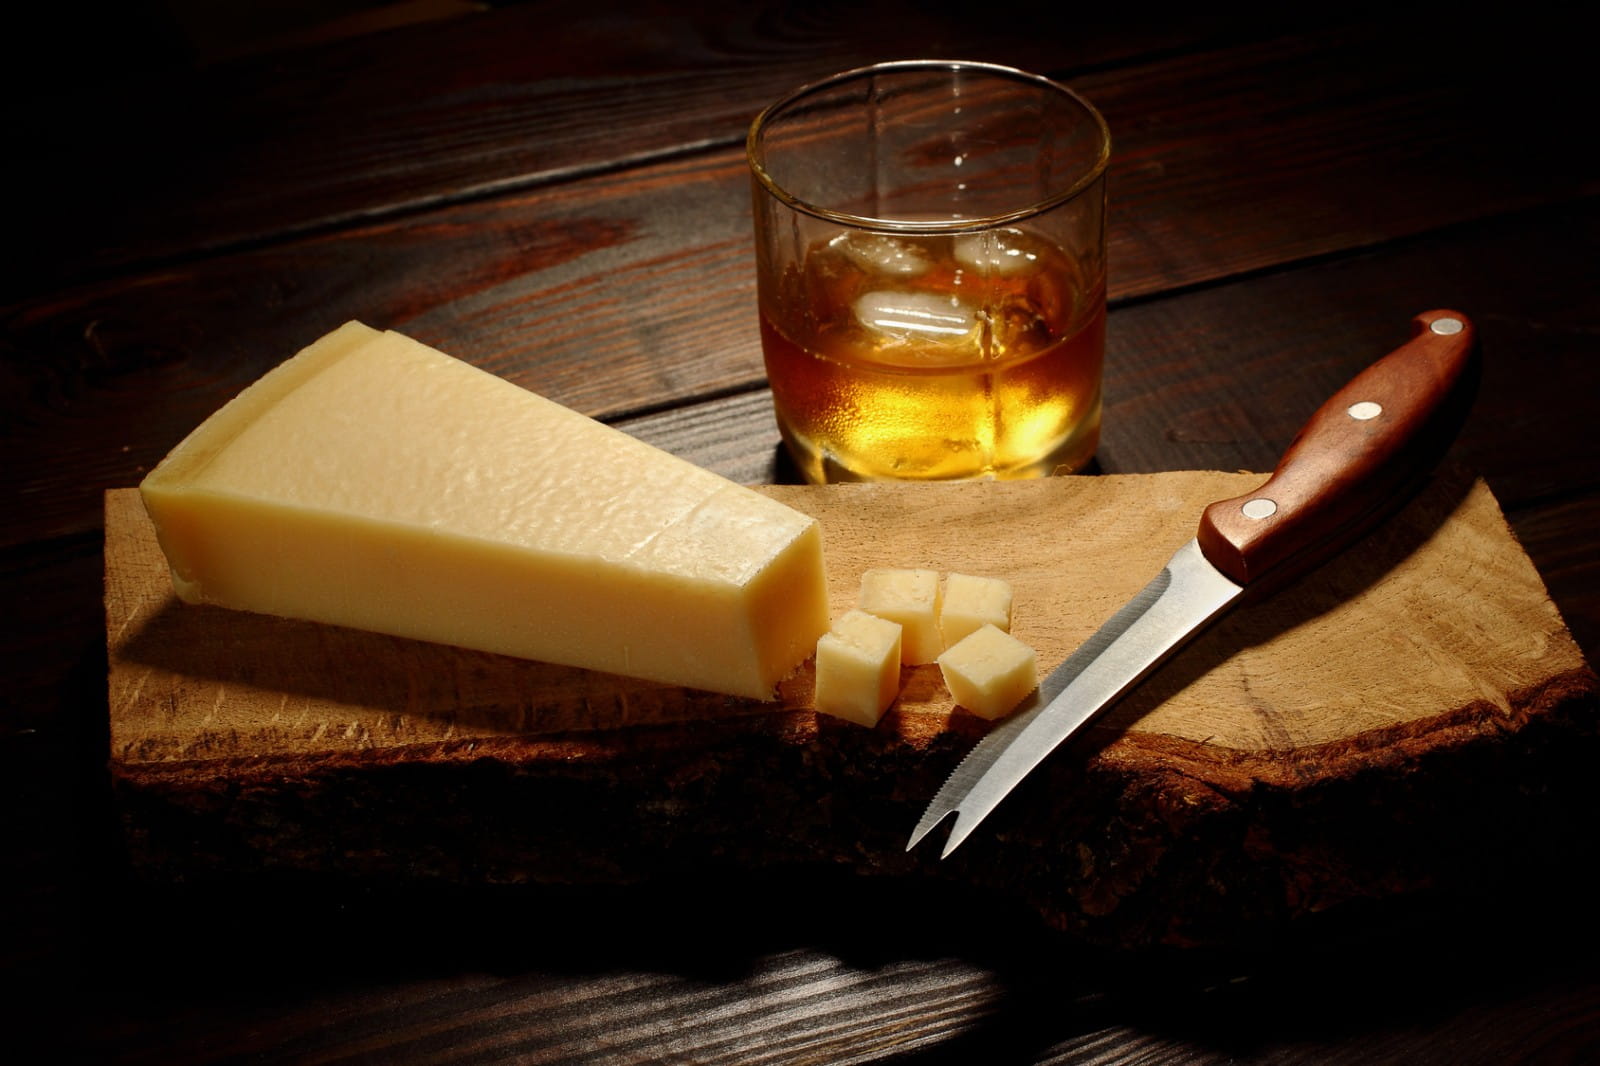 Which foods pair best with whisky?